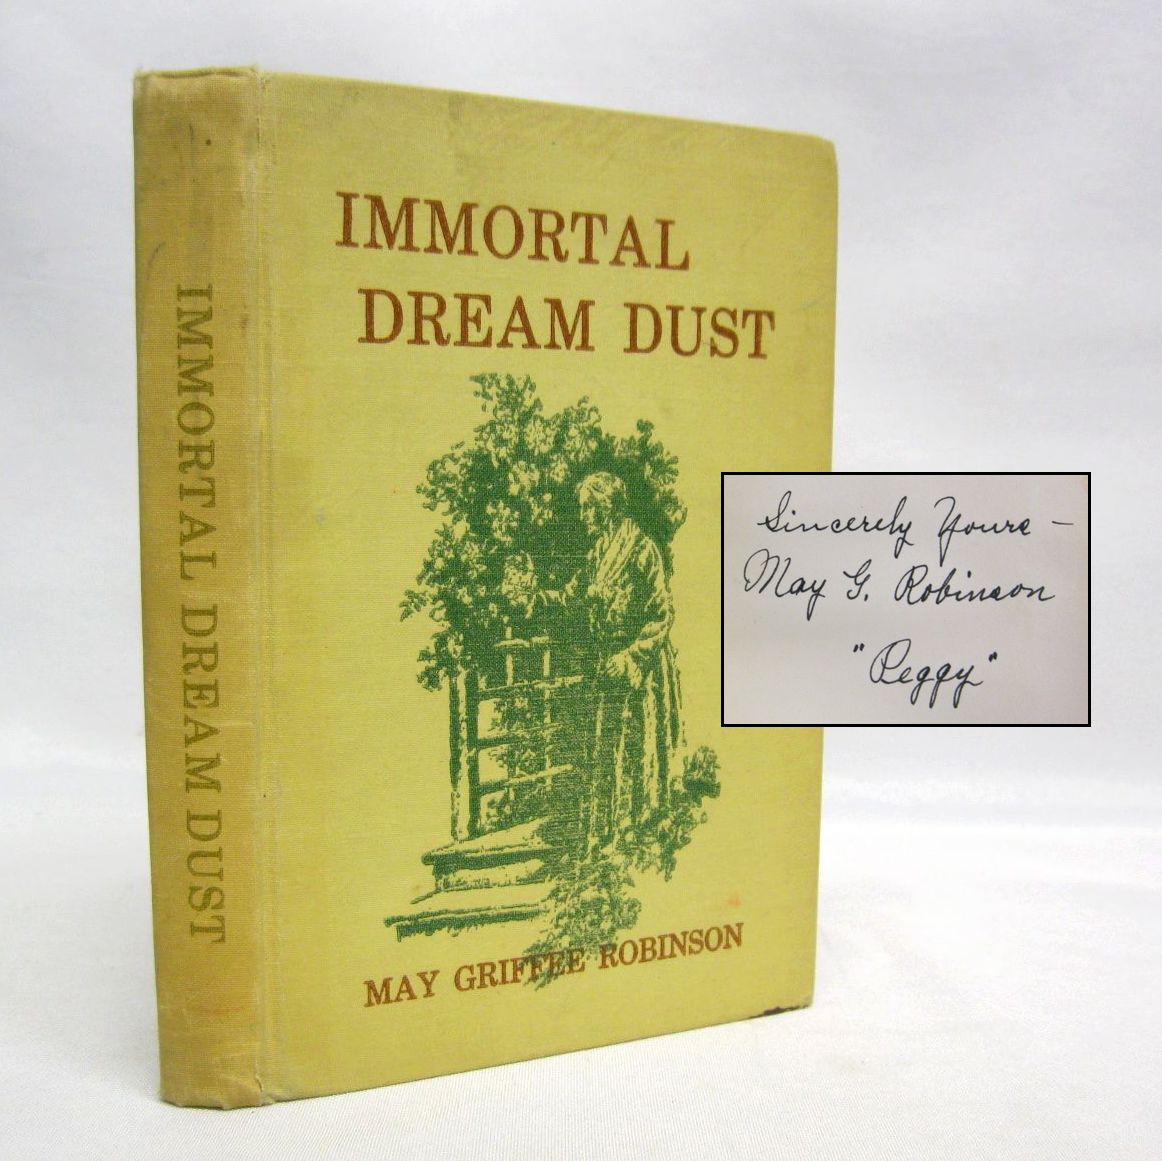 Immortal Dream Dust A Story of Pioneer Life on a Kansas Homestead by May Griffee Robinson